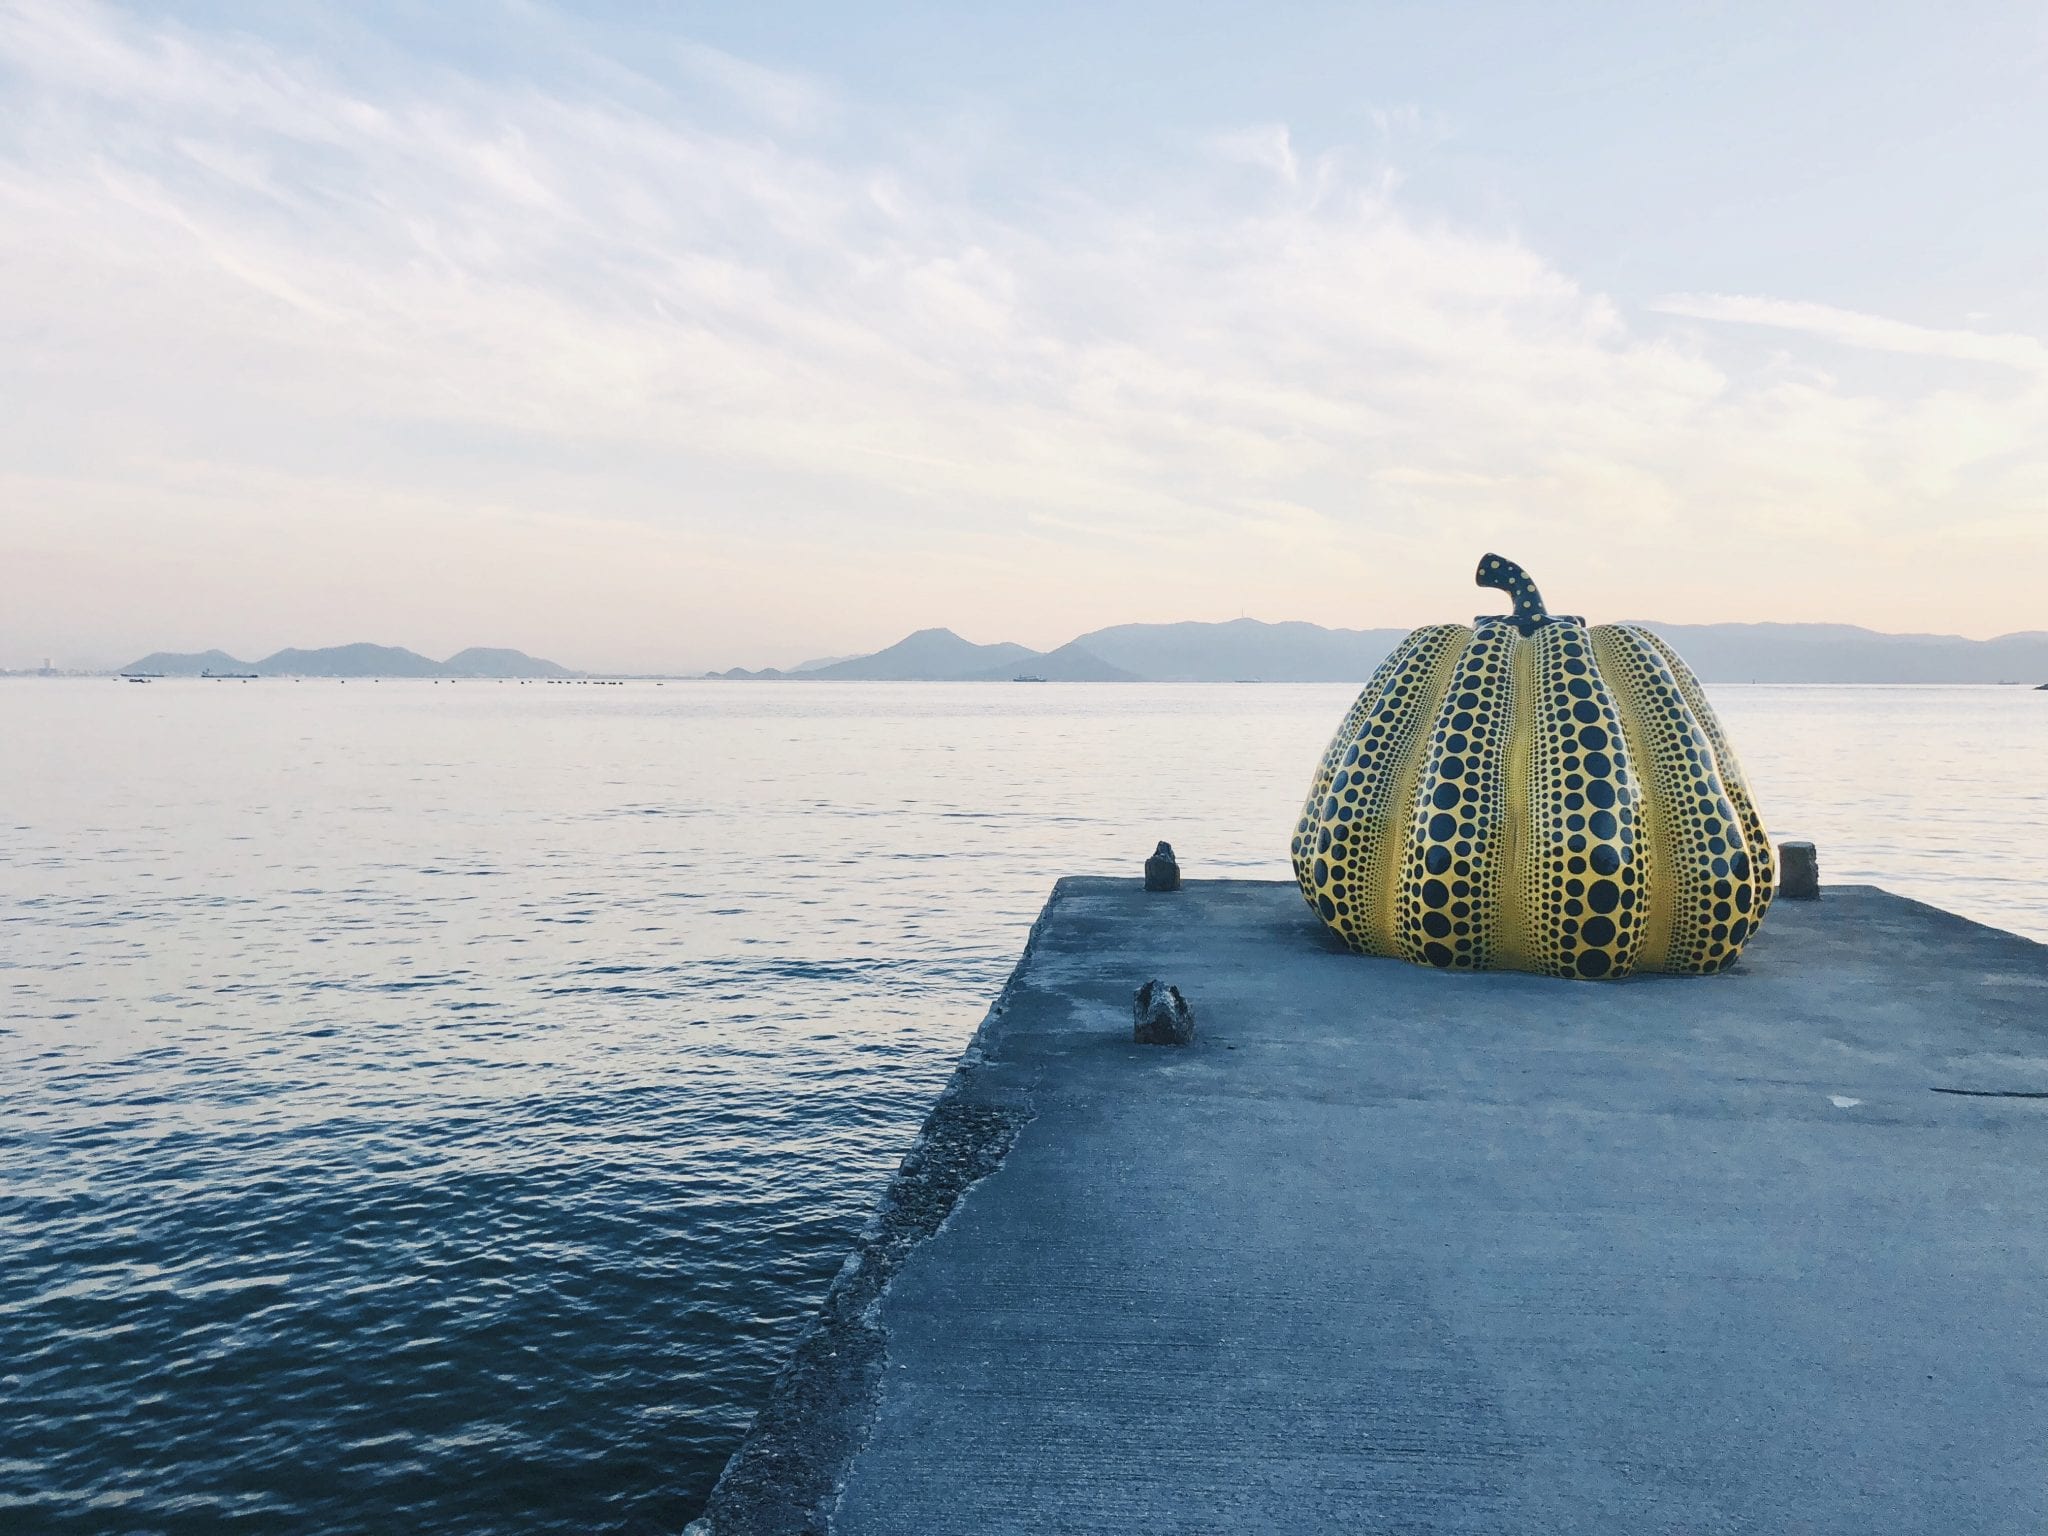 One of the most famous sculptures on Naoshima Island, Japanese artist Yayoi Kusama’s "Pumpkin," stands alone in twilight.